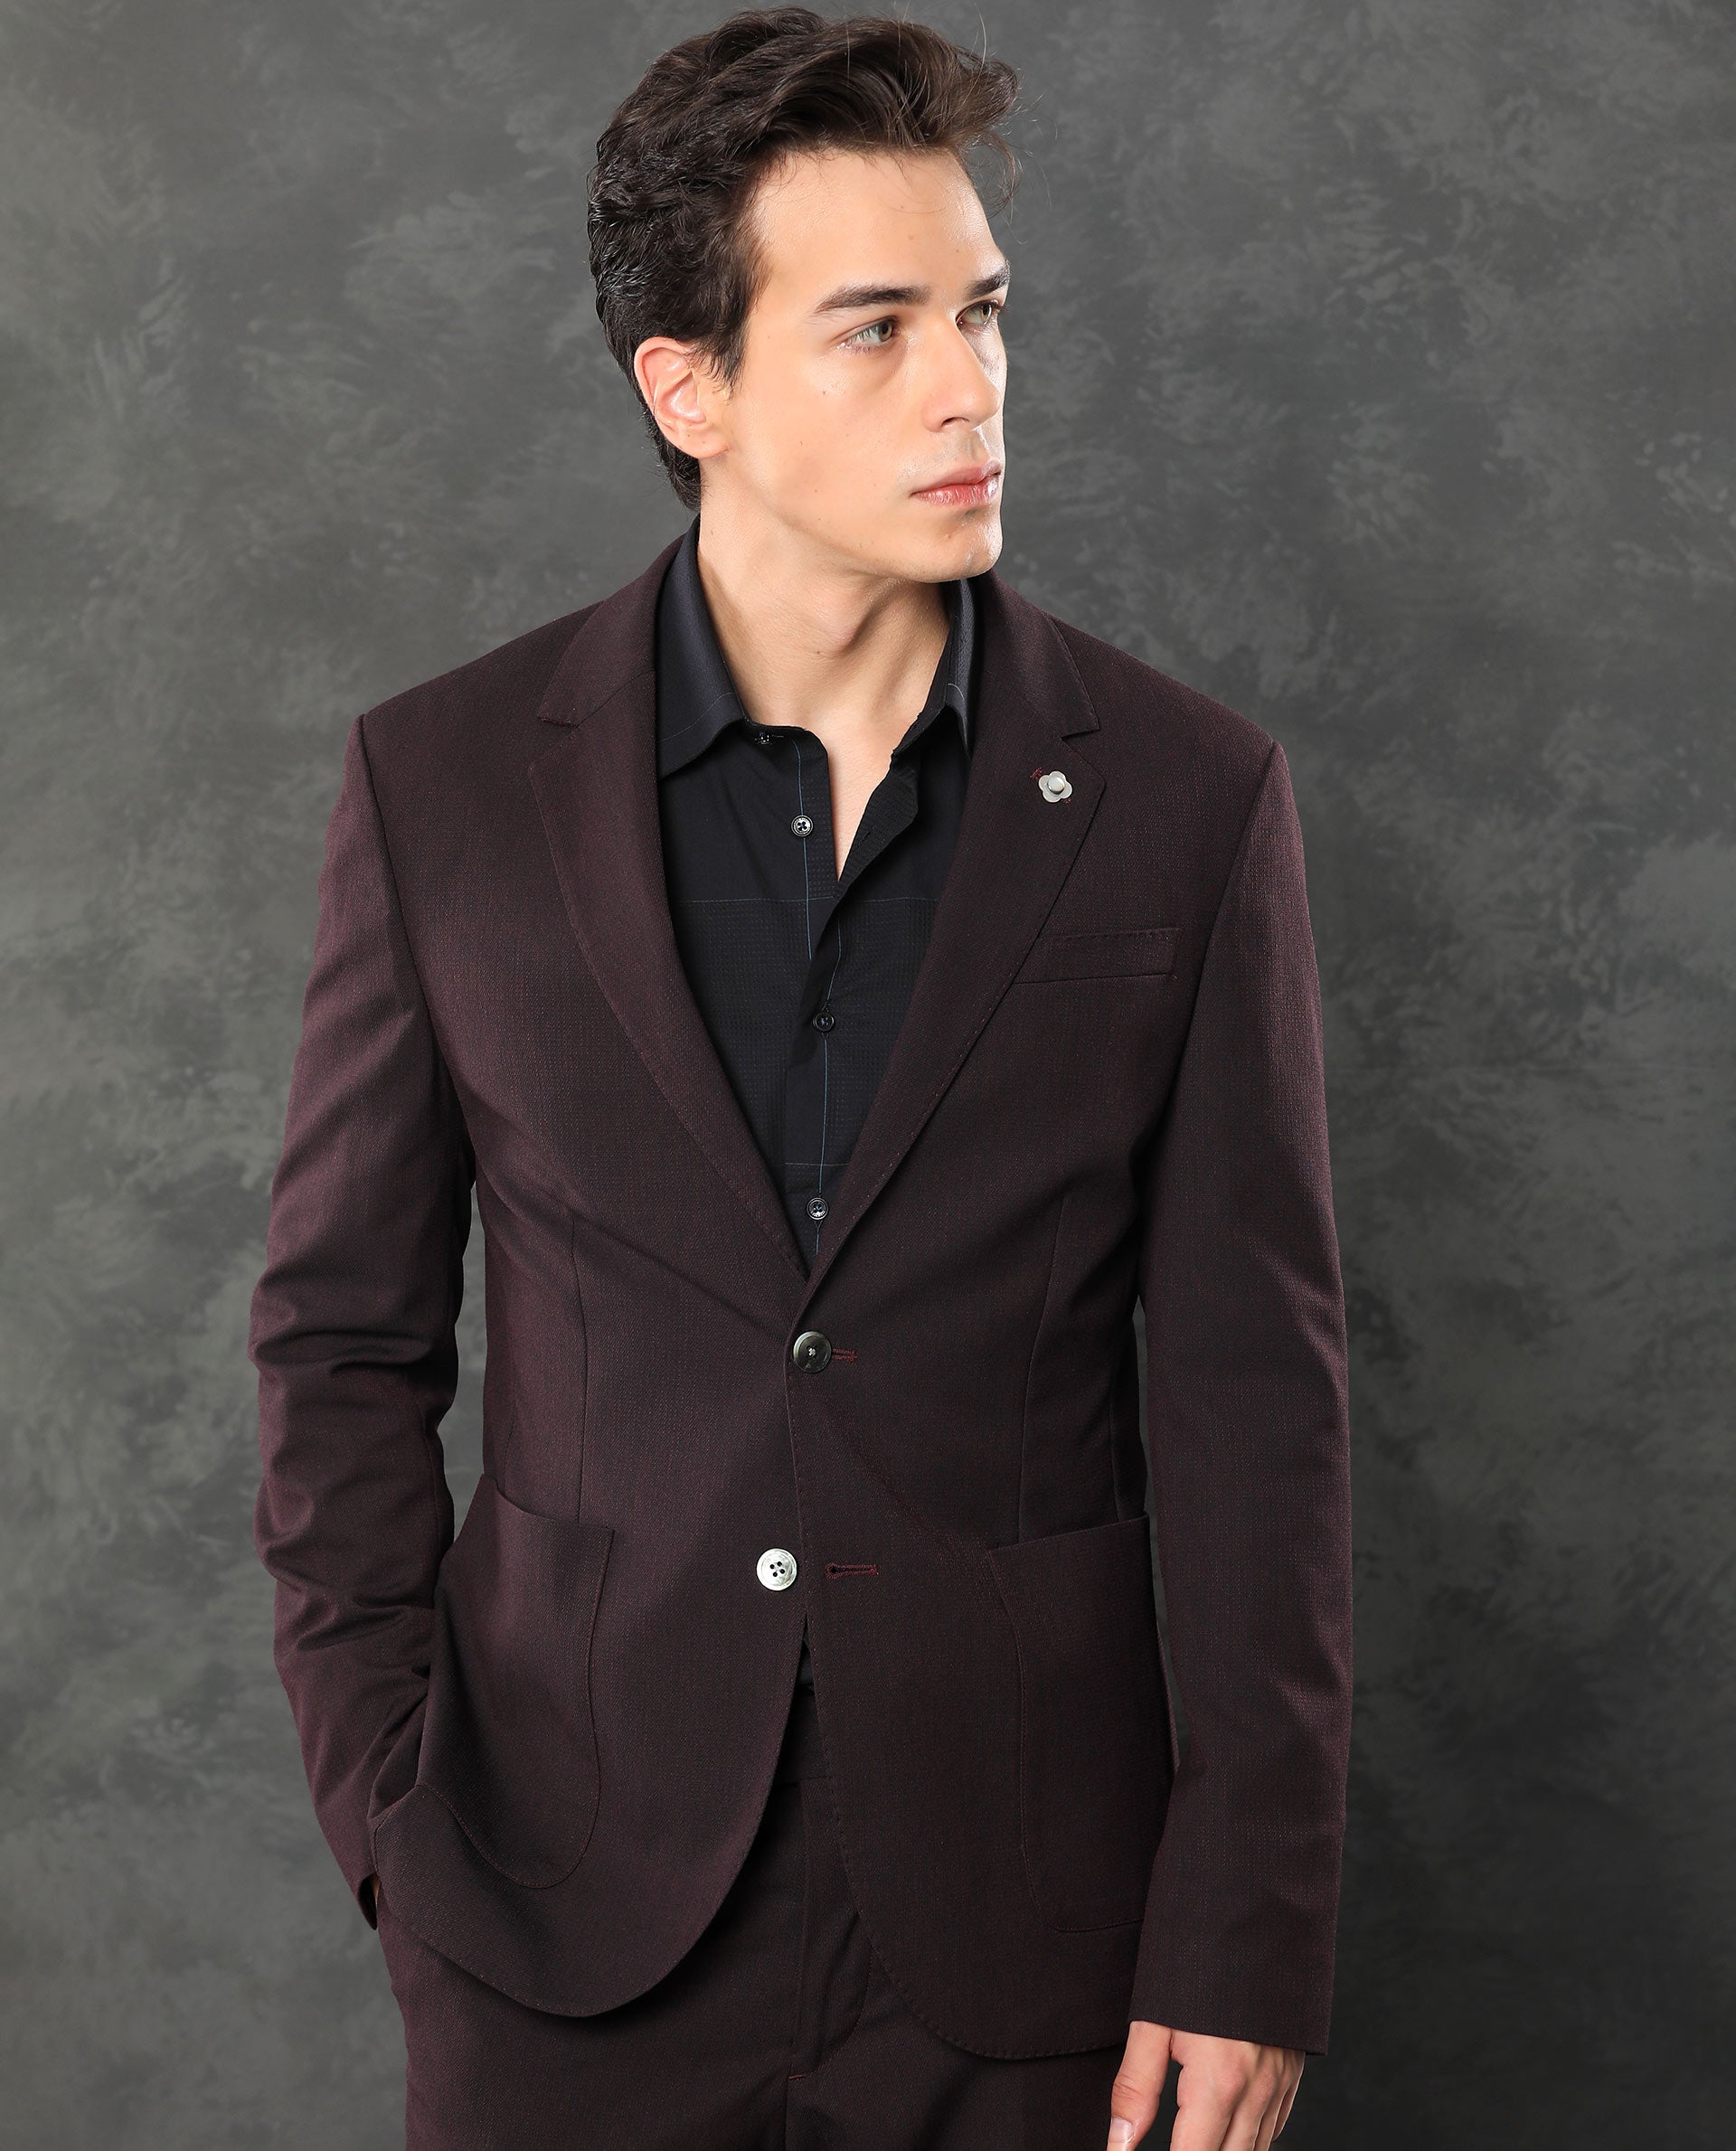 Buy Maroon Suits Collections in India at Best Price - French Crown